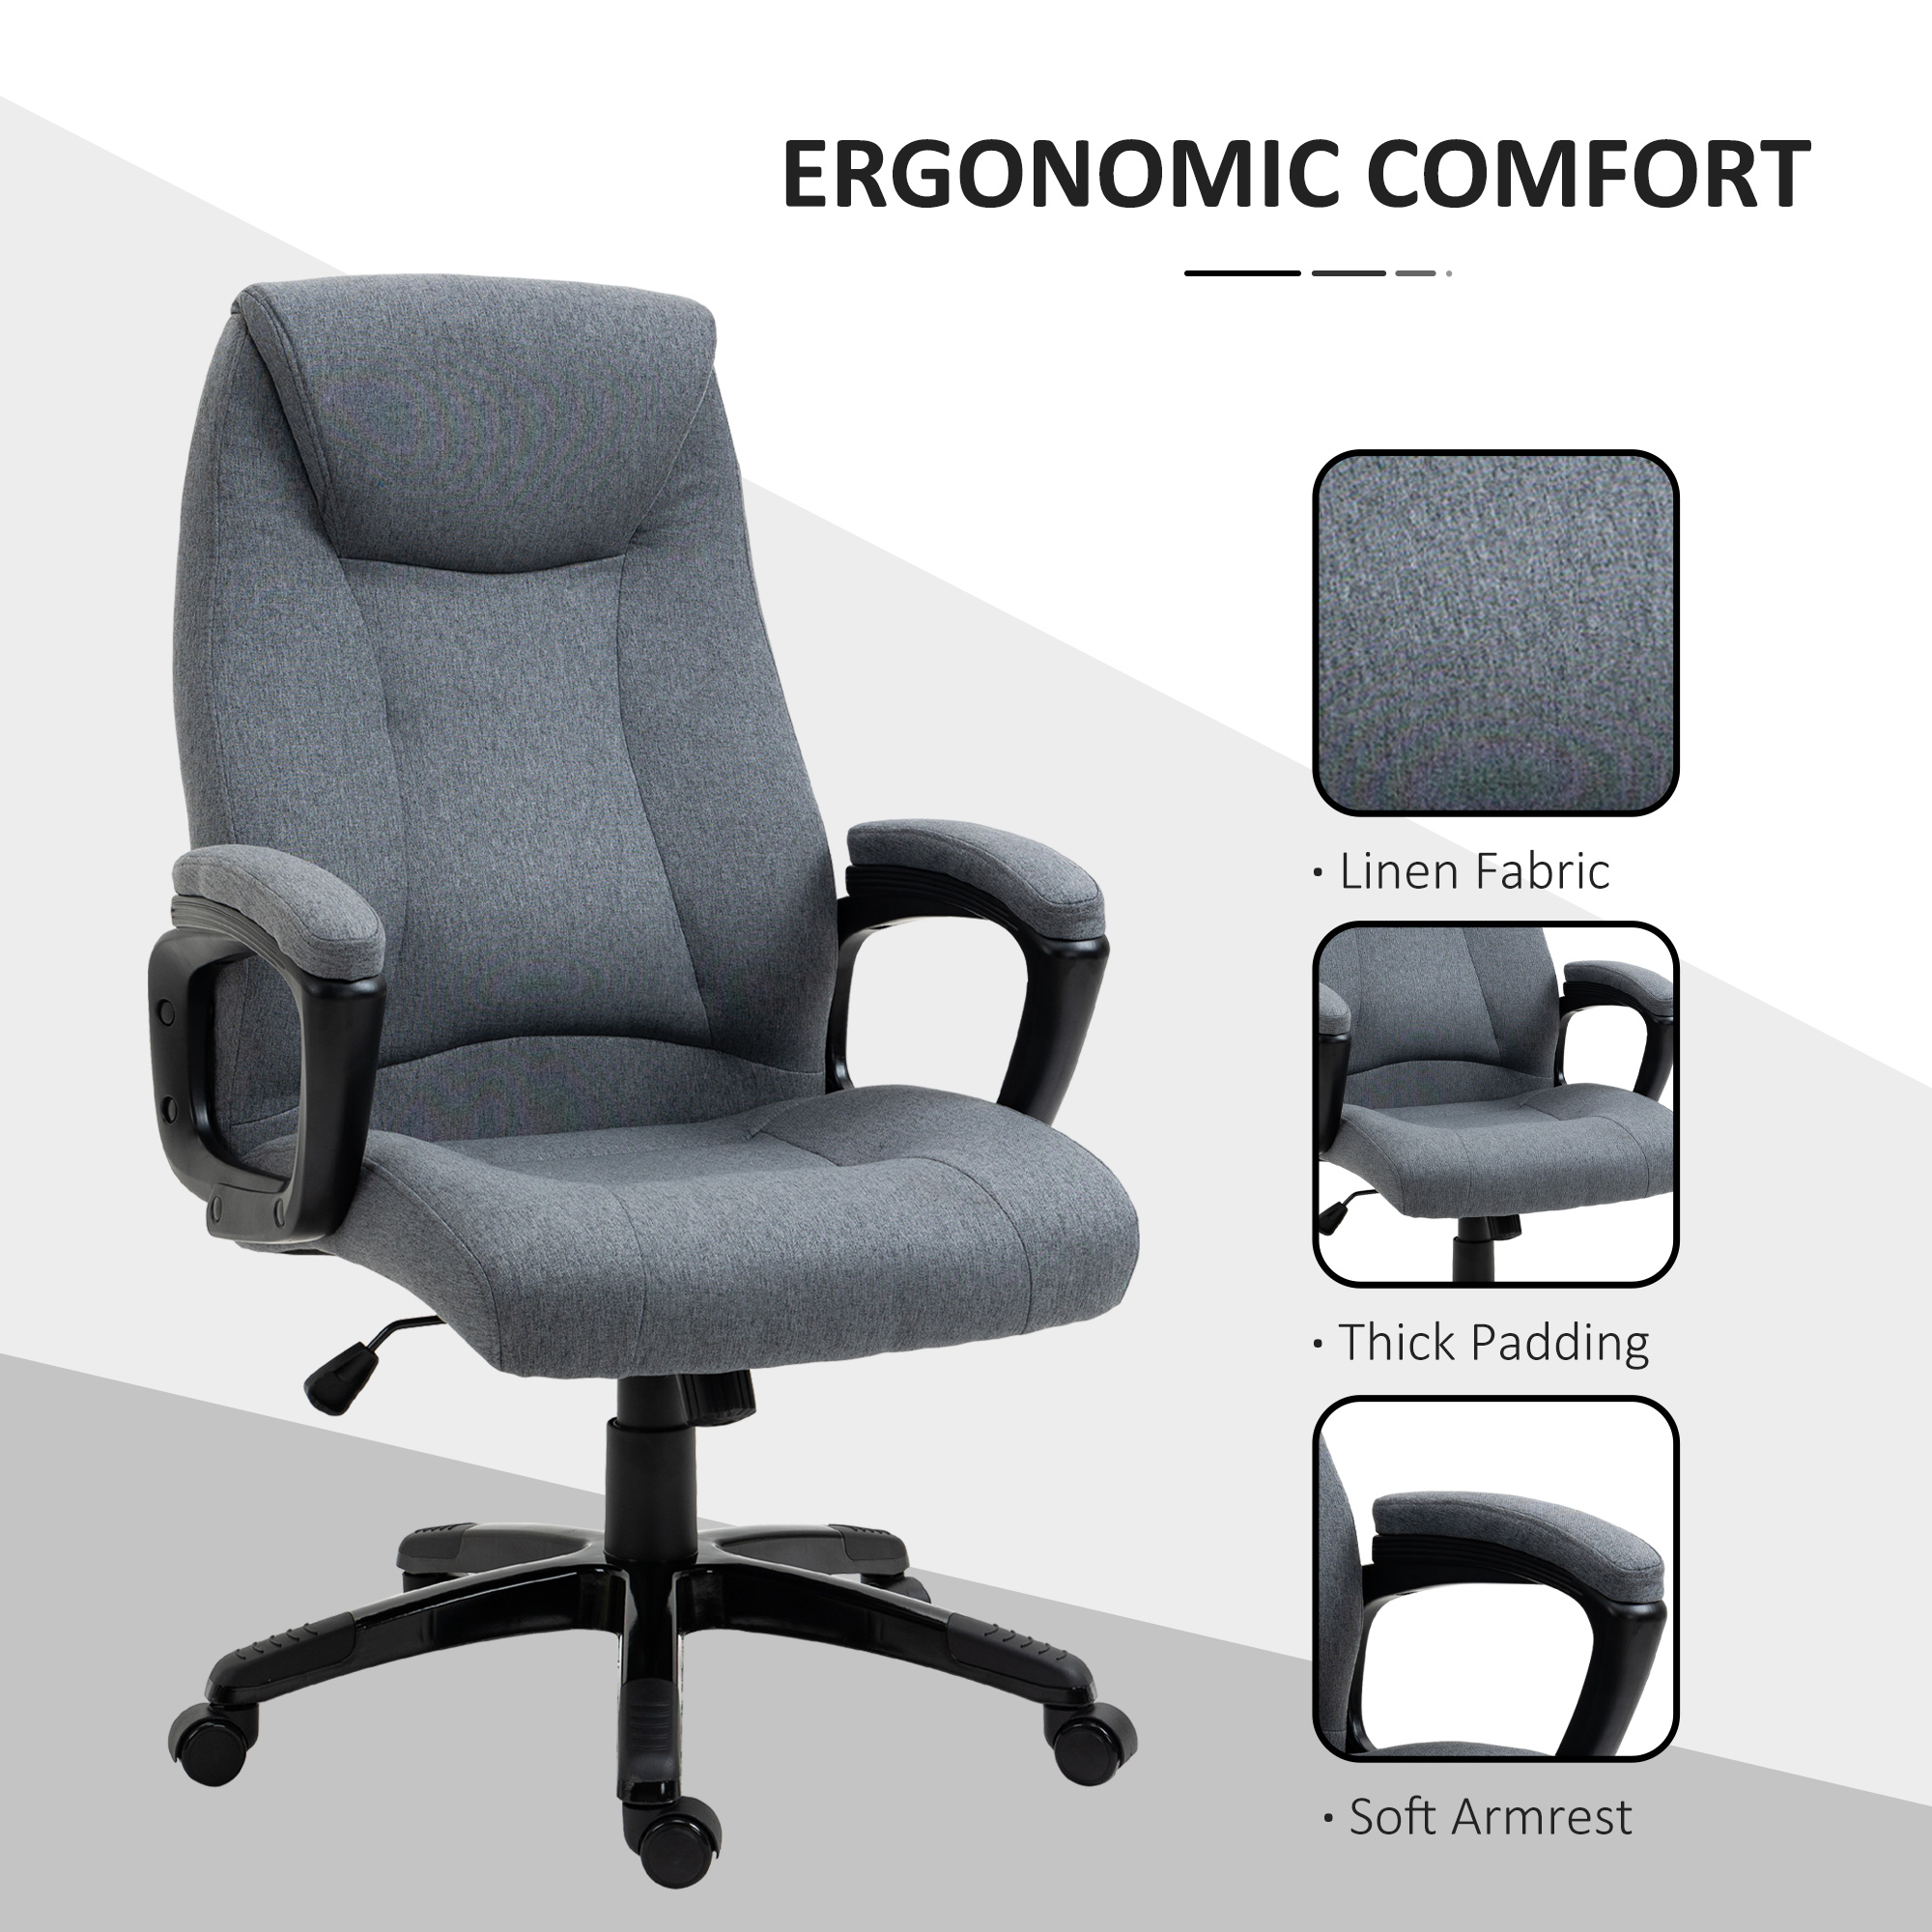 Vinsetto Fabric Home Office Chair, Computer Desk Chair with Tilt Function, Executive Chair with 360 Swivel, Adjustable Height, Padded Armrests and Headrest, Gray - image 2 of 9